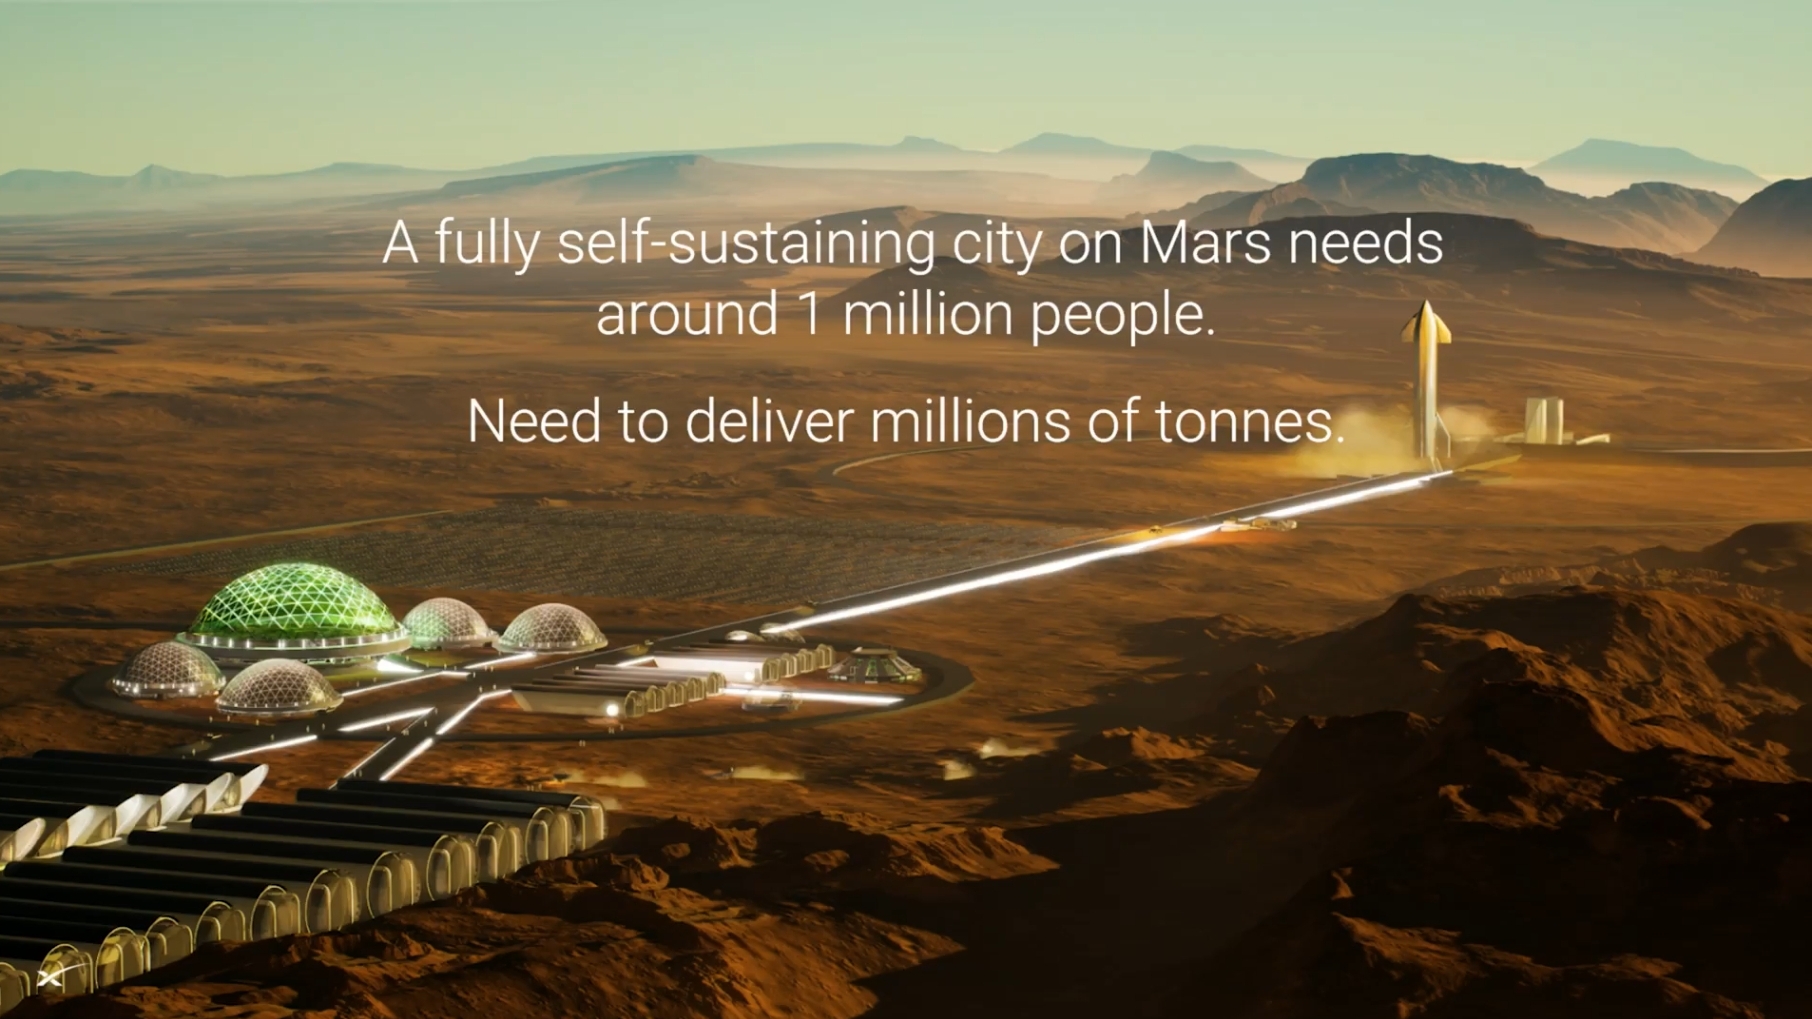 SpaceX Ambitious Plan: Thousands of Starships to Build A City of 1 Million People on Mars